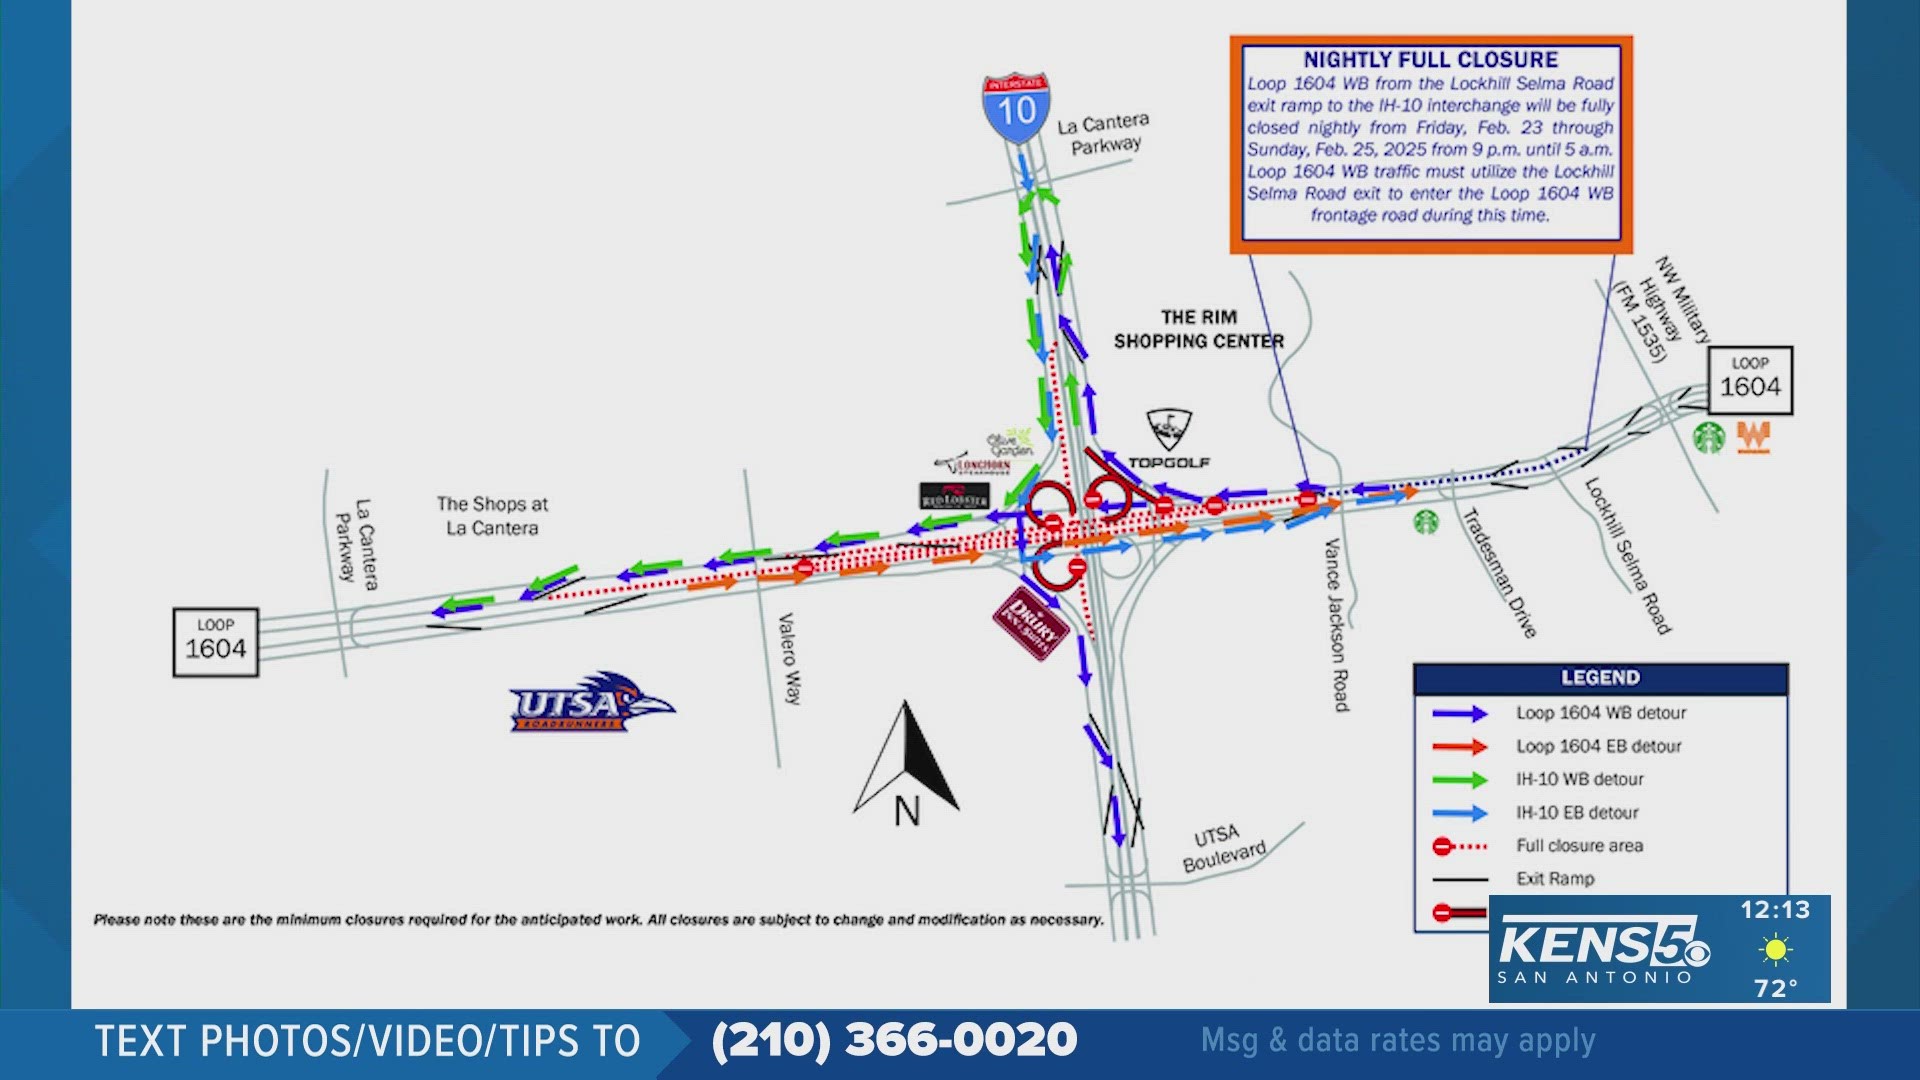 The closures are due to the Loop 1604 North Expansion Project and could change dependent on weather.